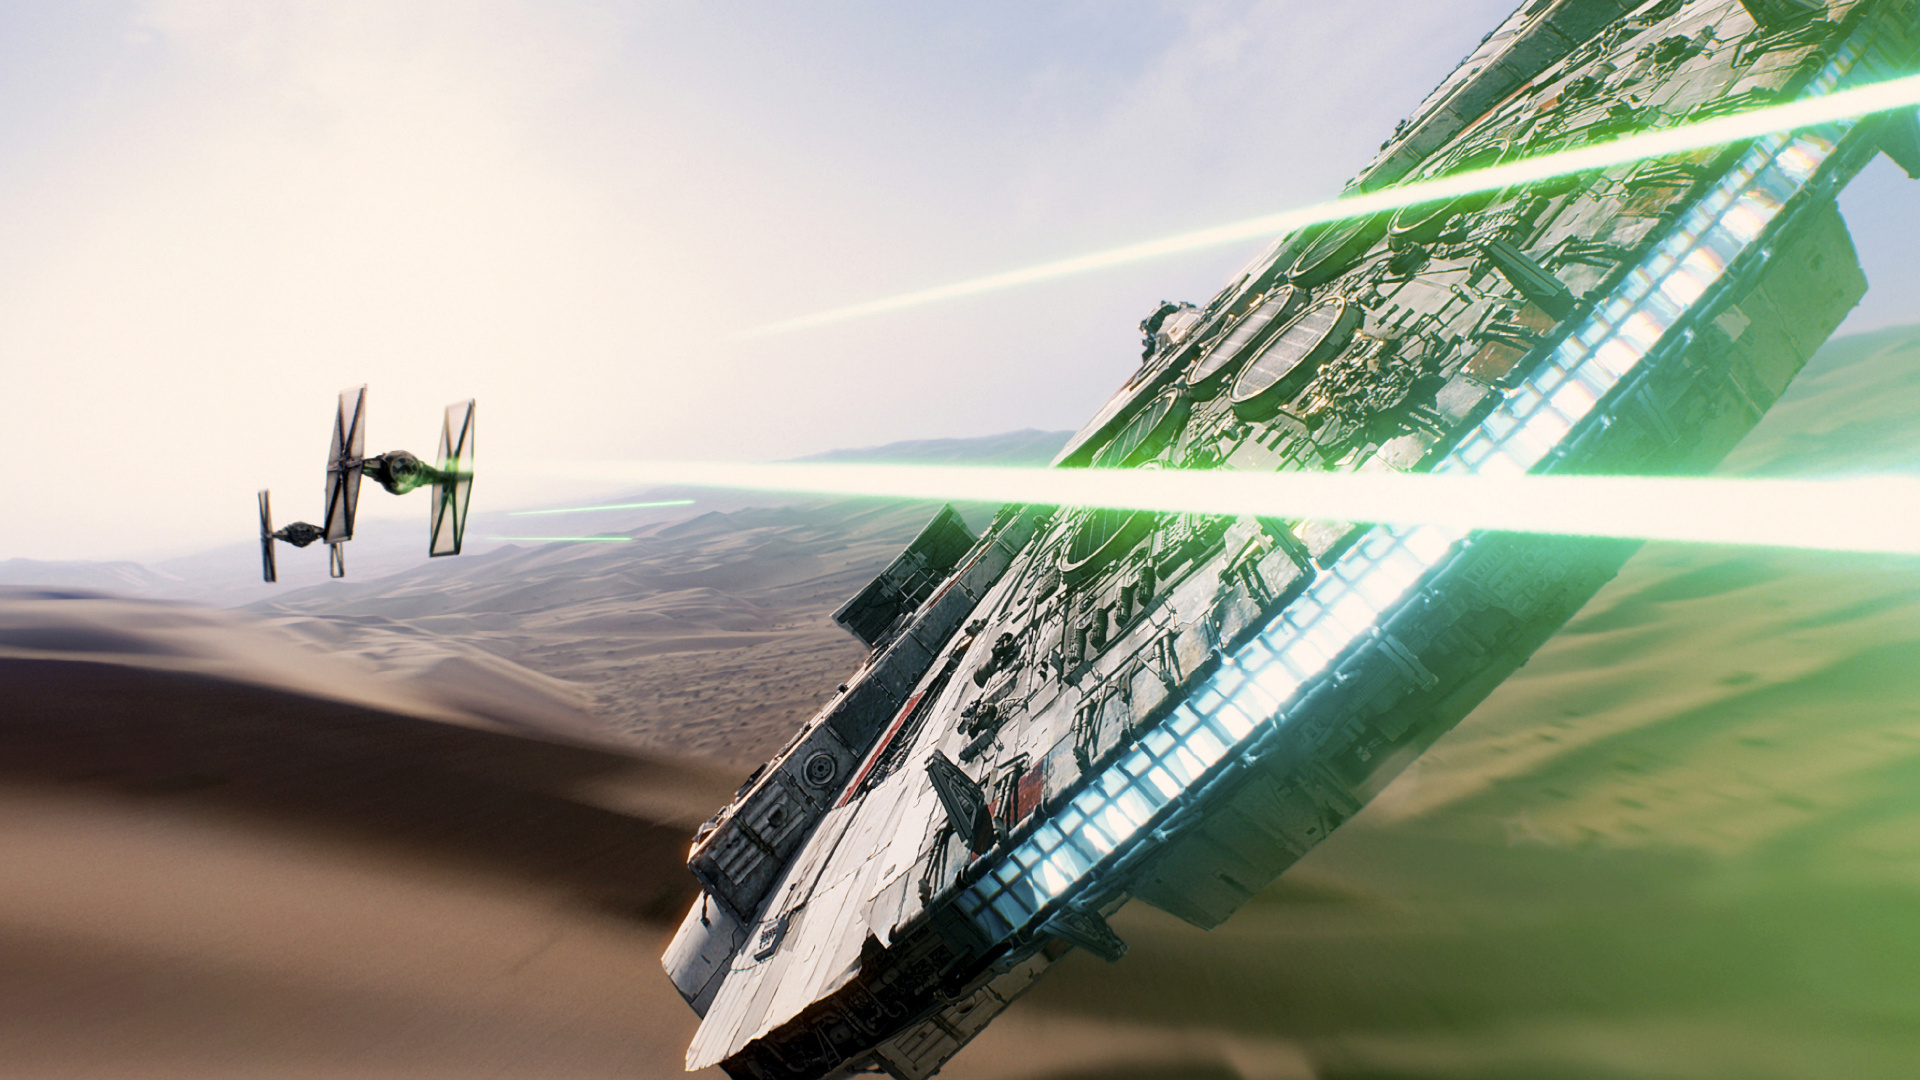 Millennium Falcon, Star Wars, Wing, The Force, Air Travel. Wallpaper in 1920x1080 Resolution